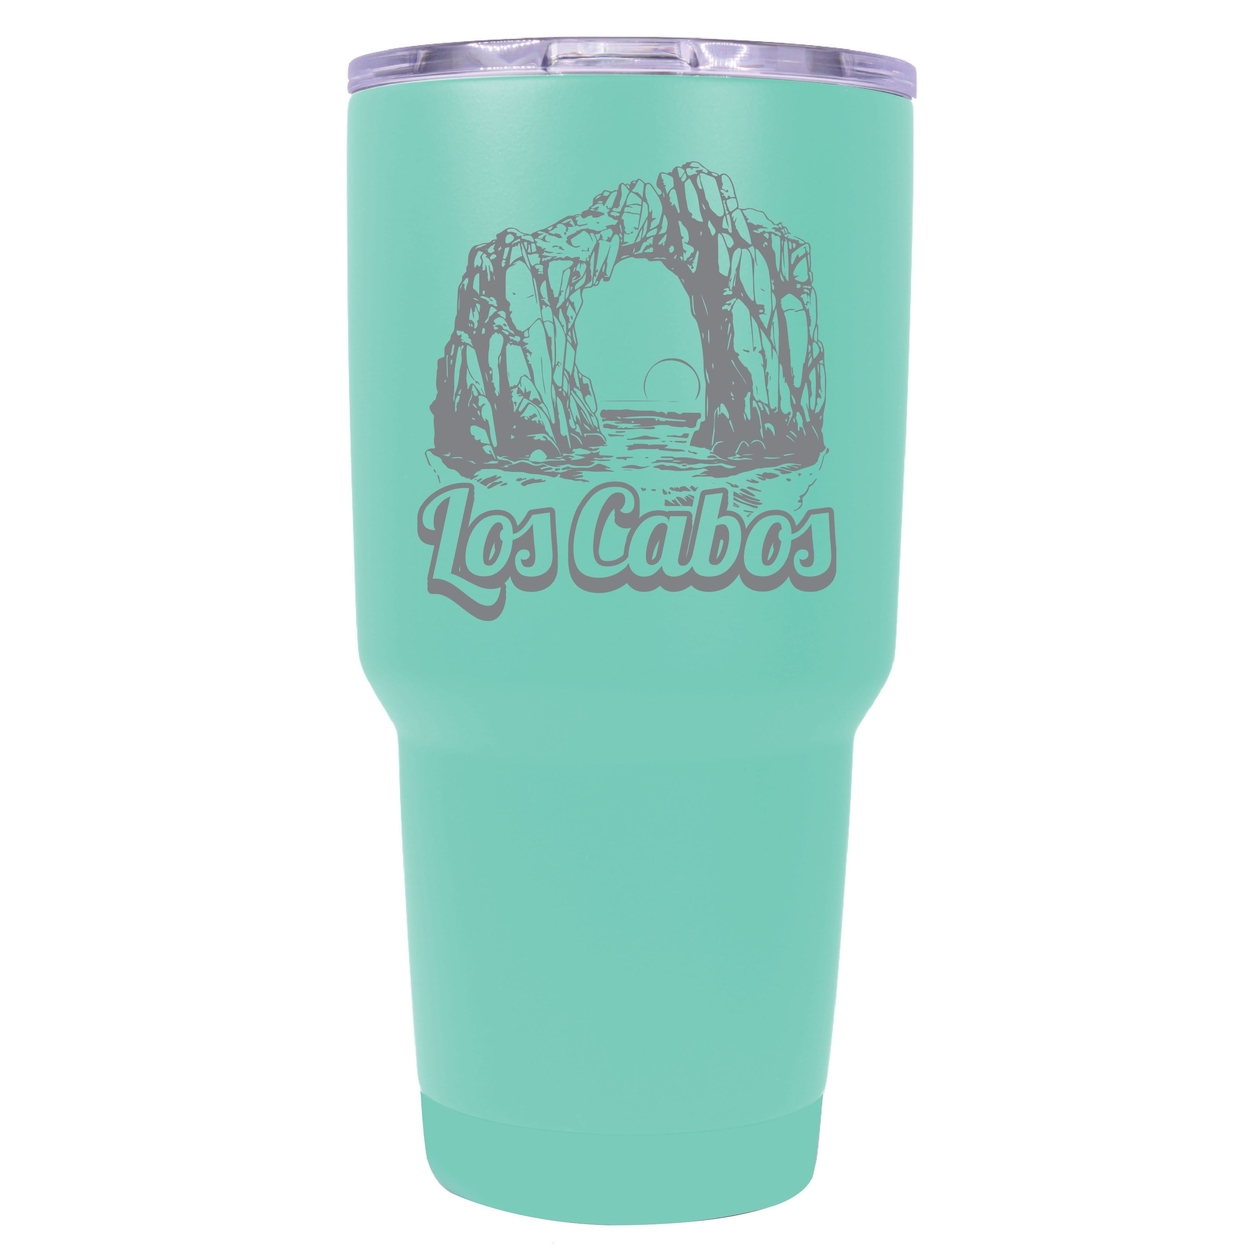 Los Cabos Mexico Souvenir 24 Oz Engraved Insulated Stainless Steel Tumbler - Red,,Single Unit